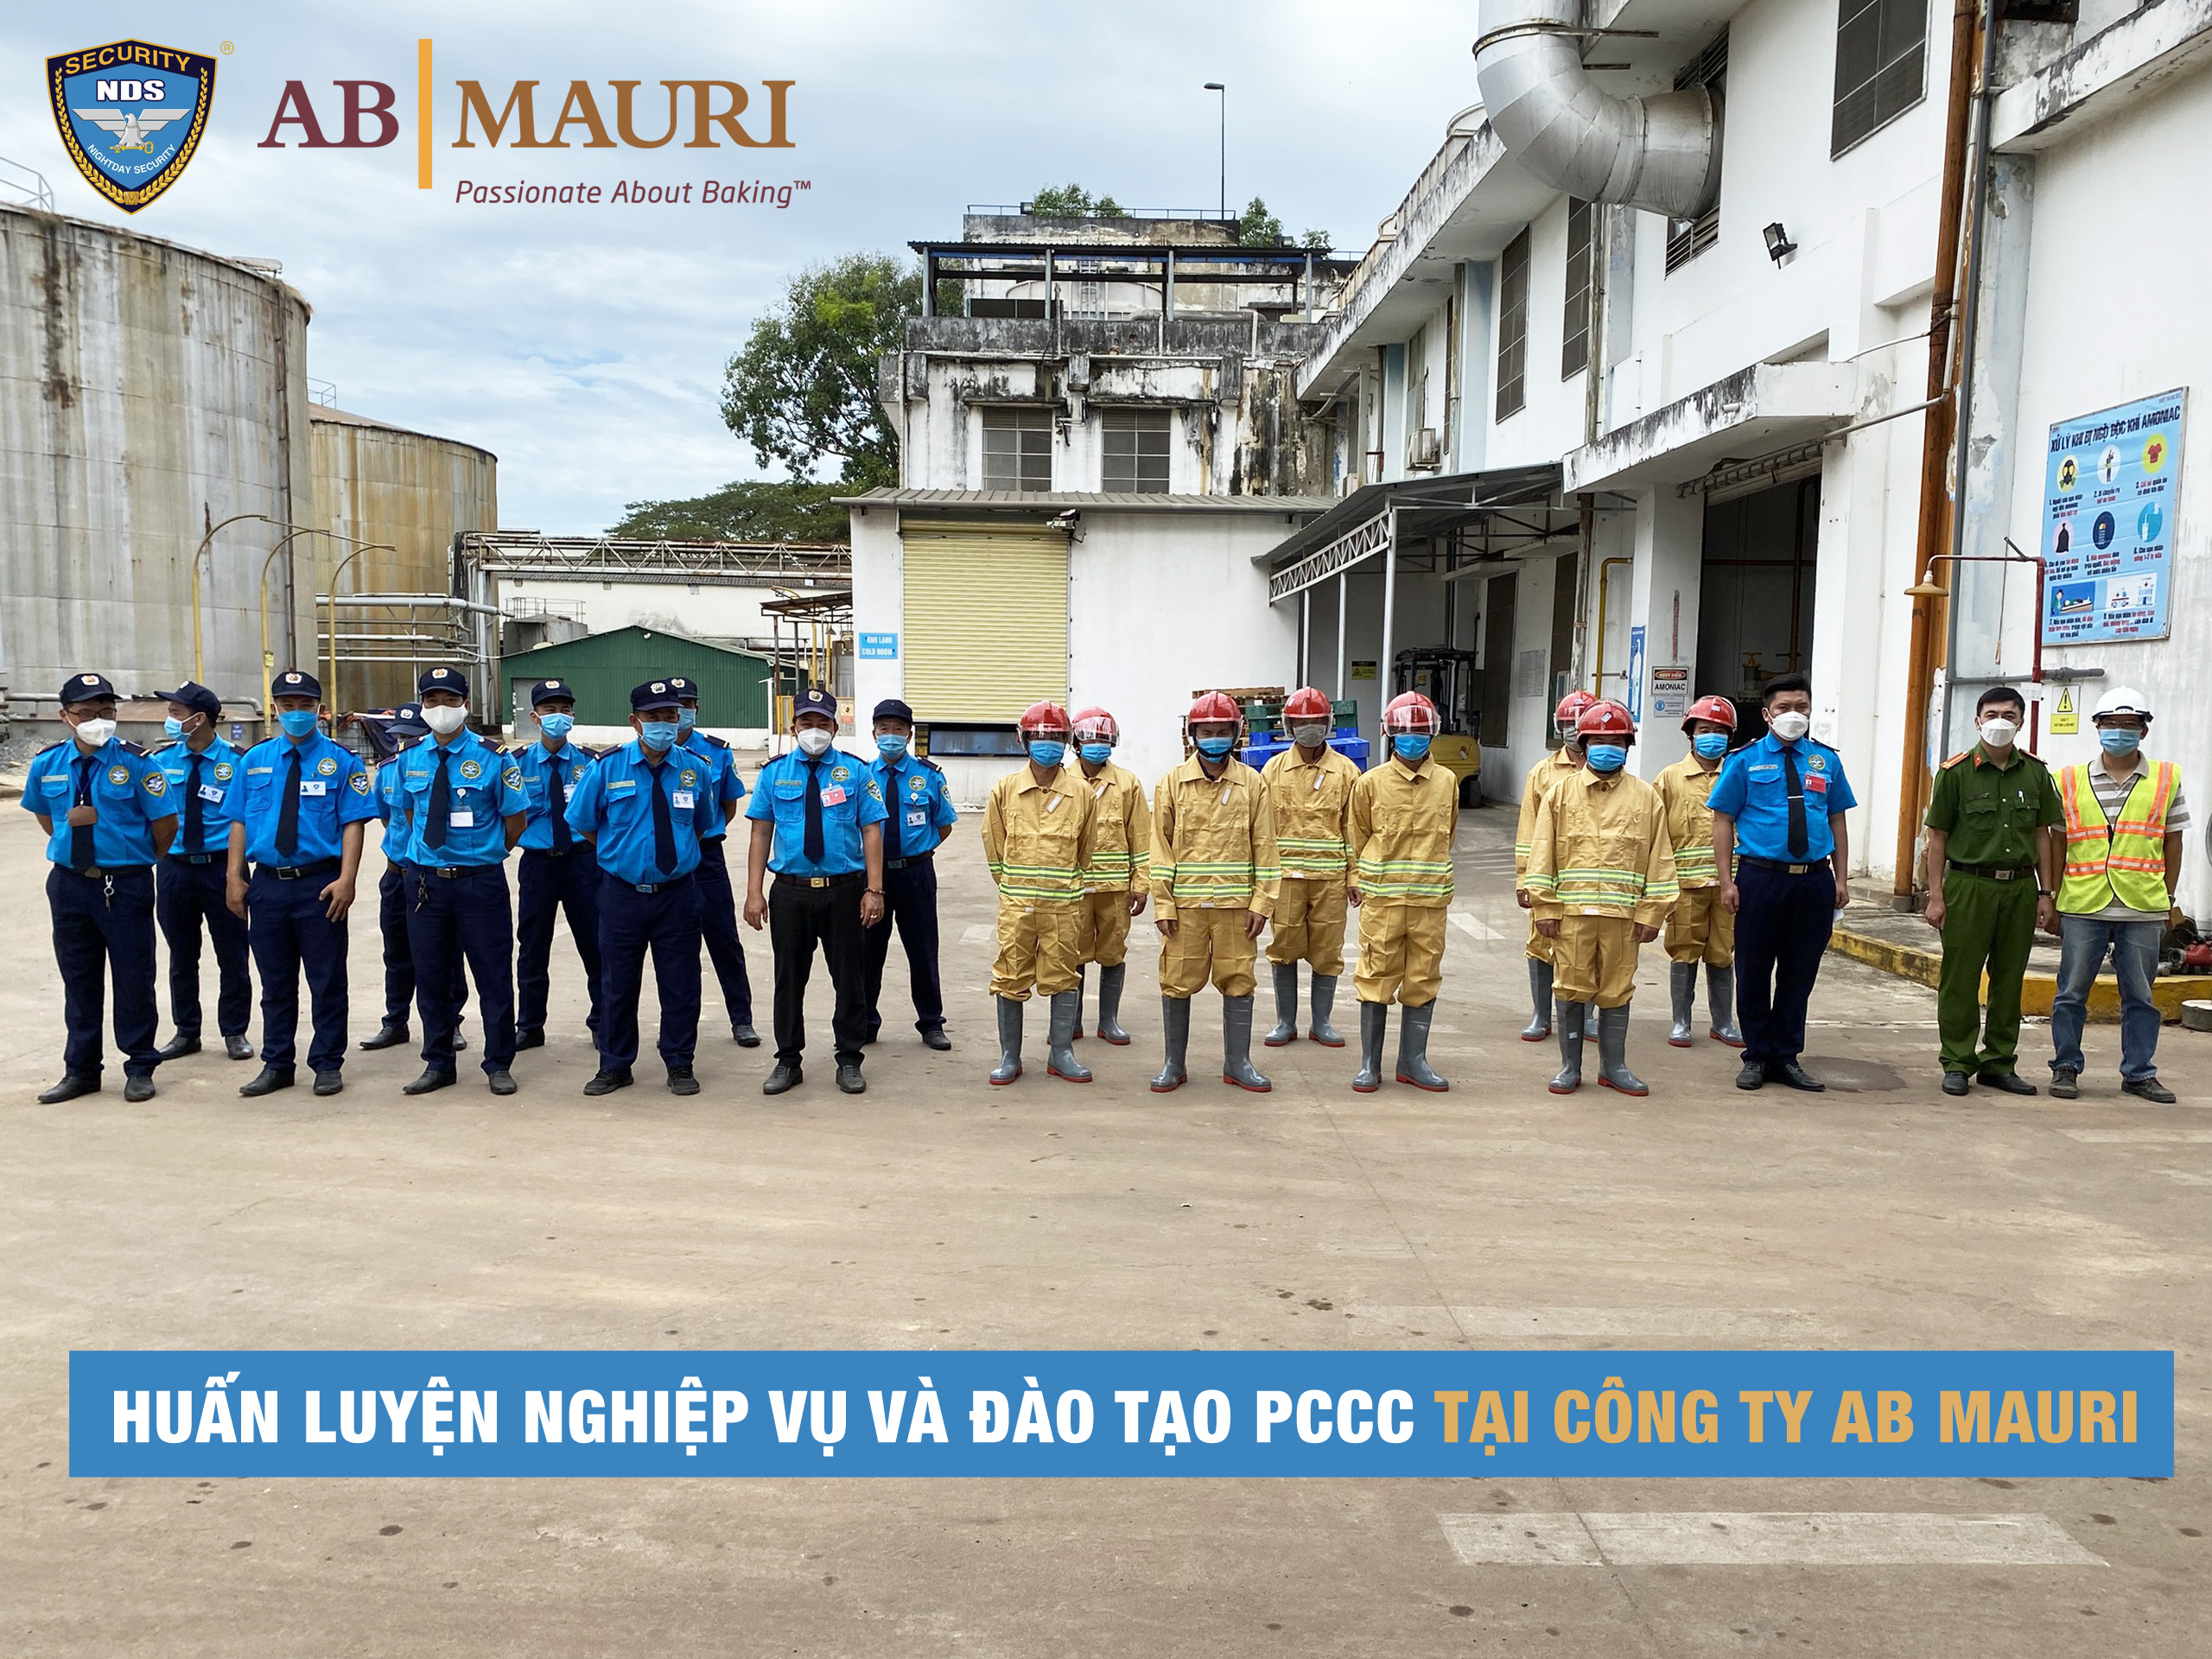 Security training and fire prevention at AB MAURI VIETNAM by NDS